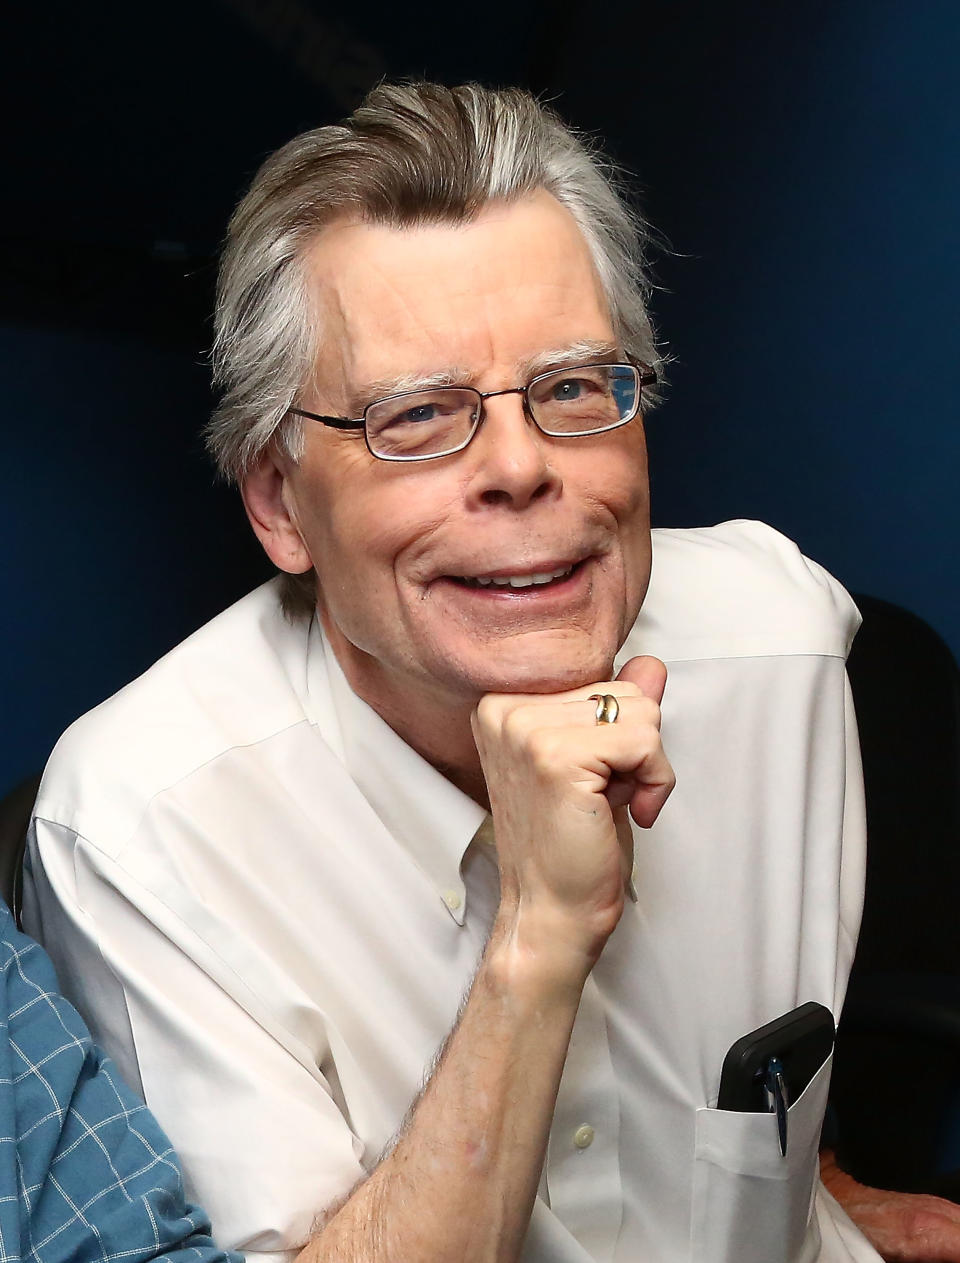 NEW YORK, NY - SEPTEMBER 26:  (EXCLUSIVE COVERAGE) Author Stephen King visits the SiriusXM Studios on September 26, 2017 in New York City.  (Photo by Astrid Stawiarz/Getty Images)